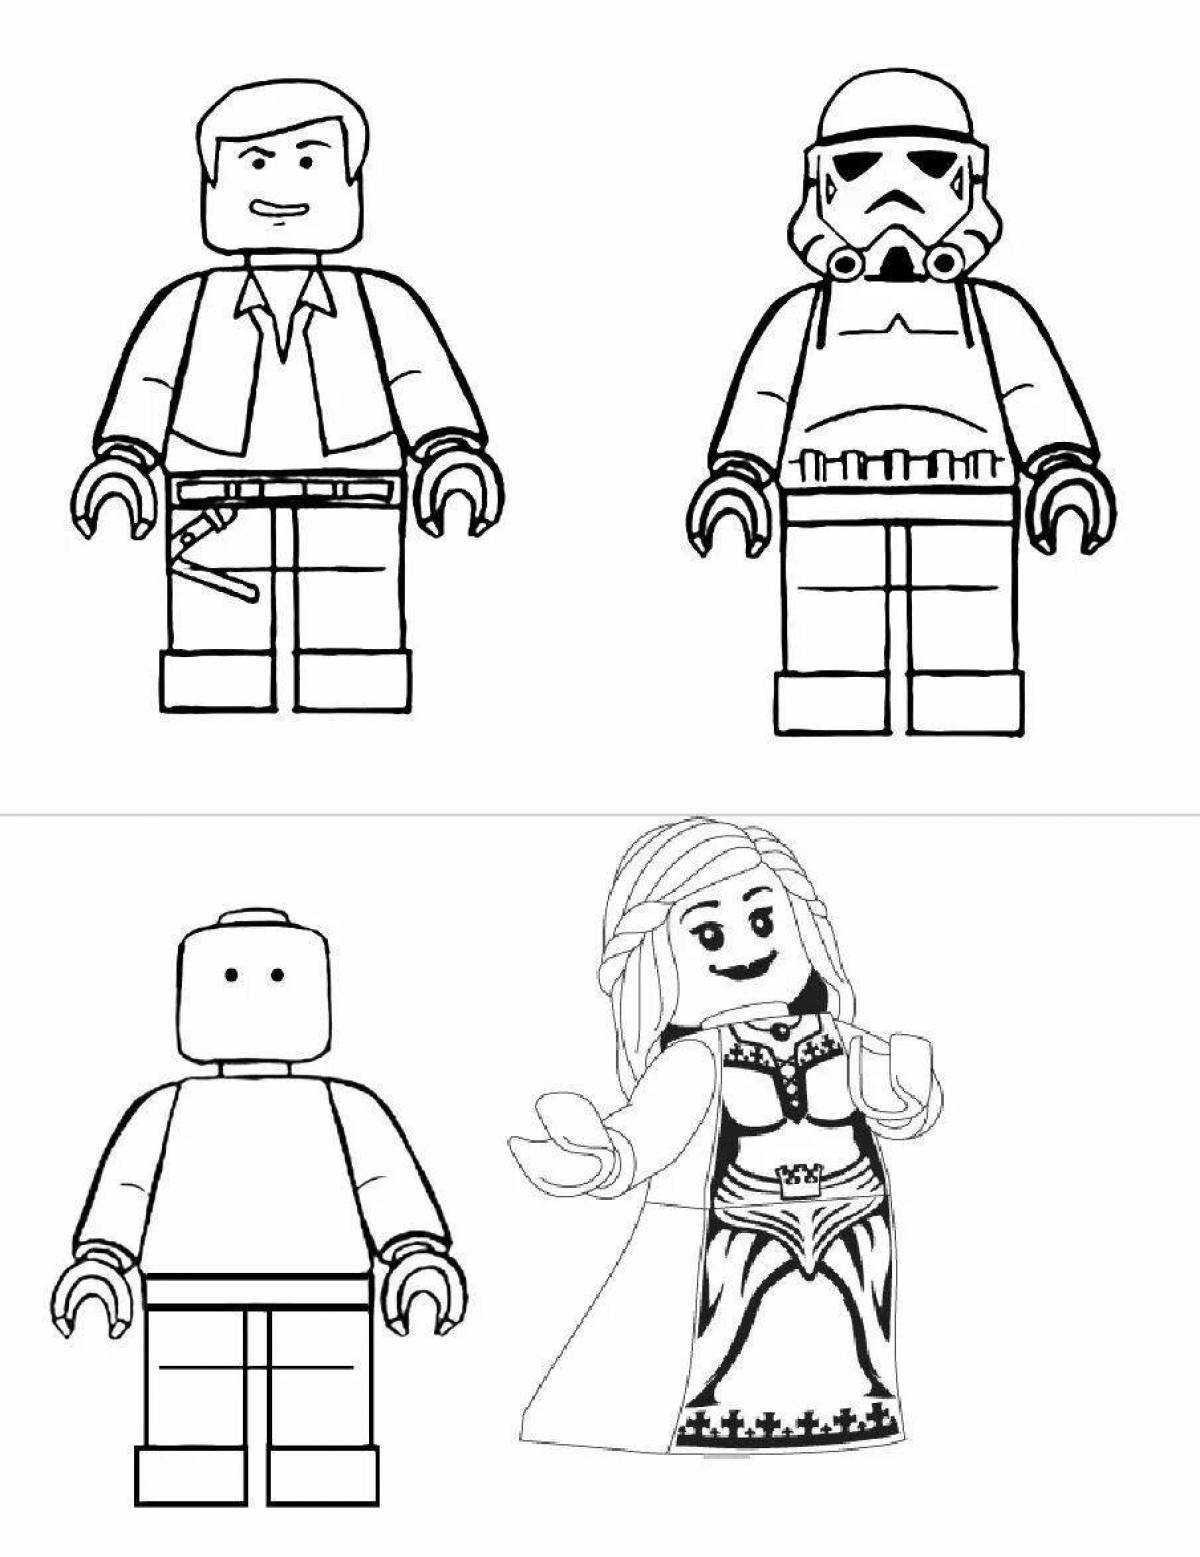 Lego figures for kids #1